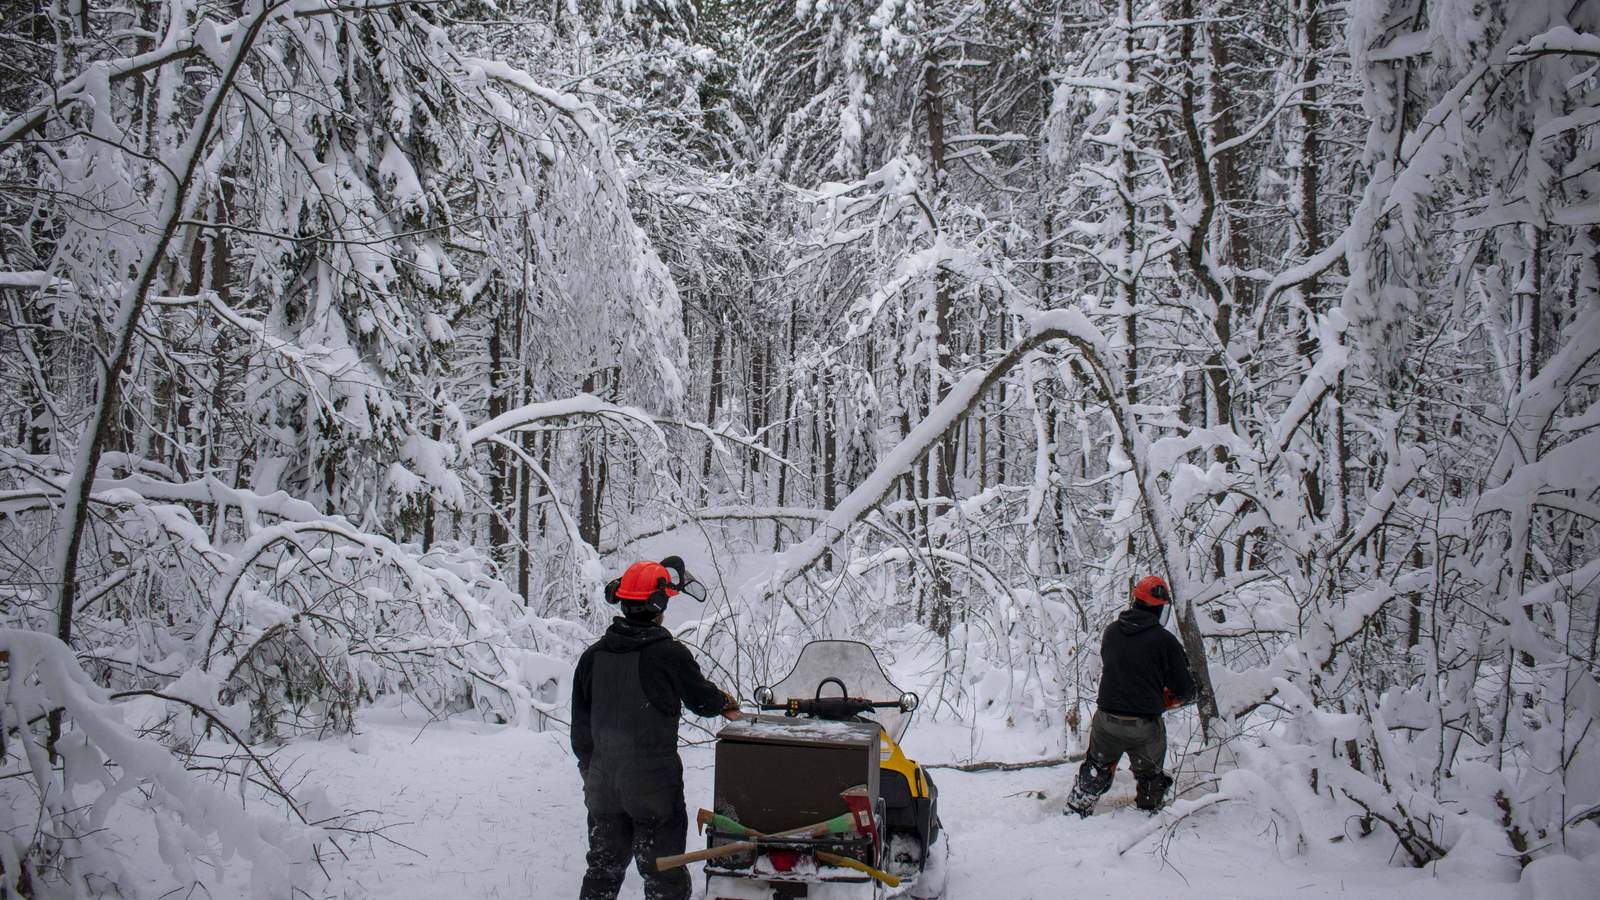 Riders on recreational snowmobile trails urged to use extra caution as storm cleanup continues